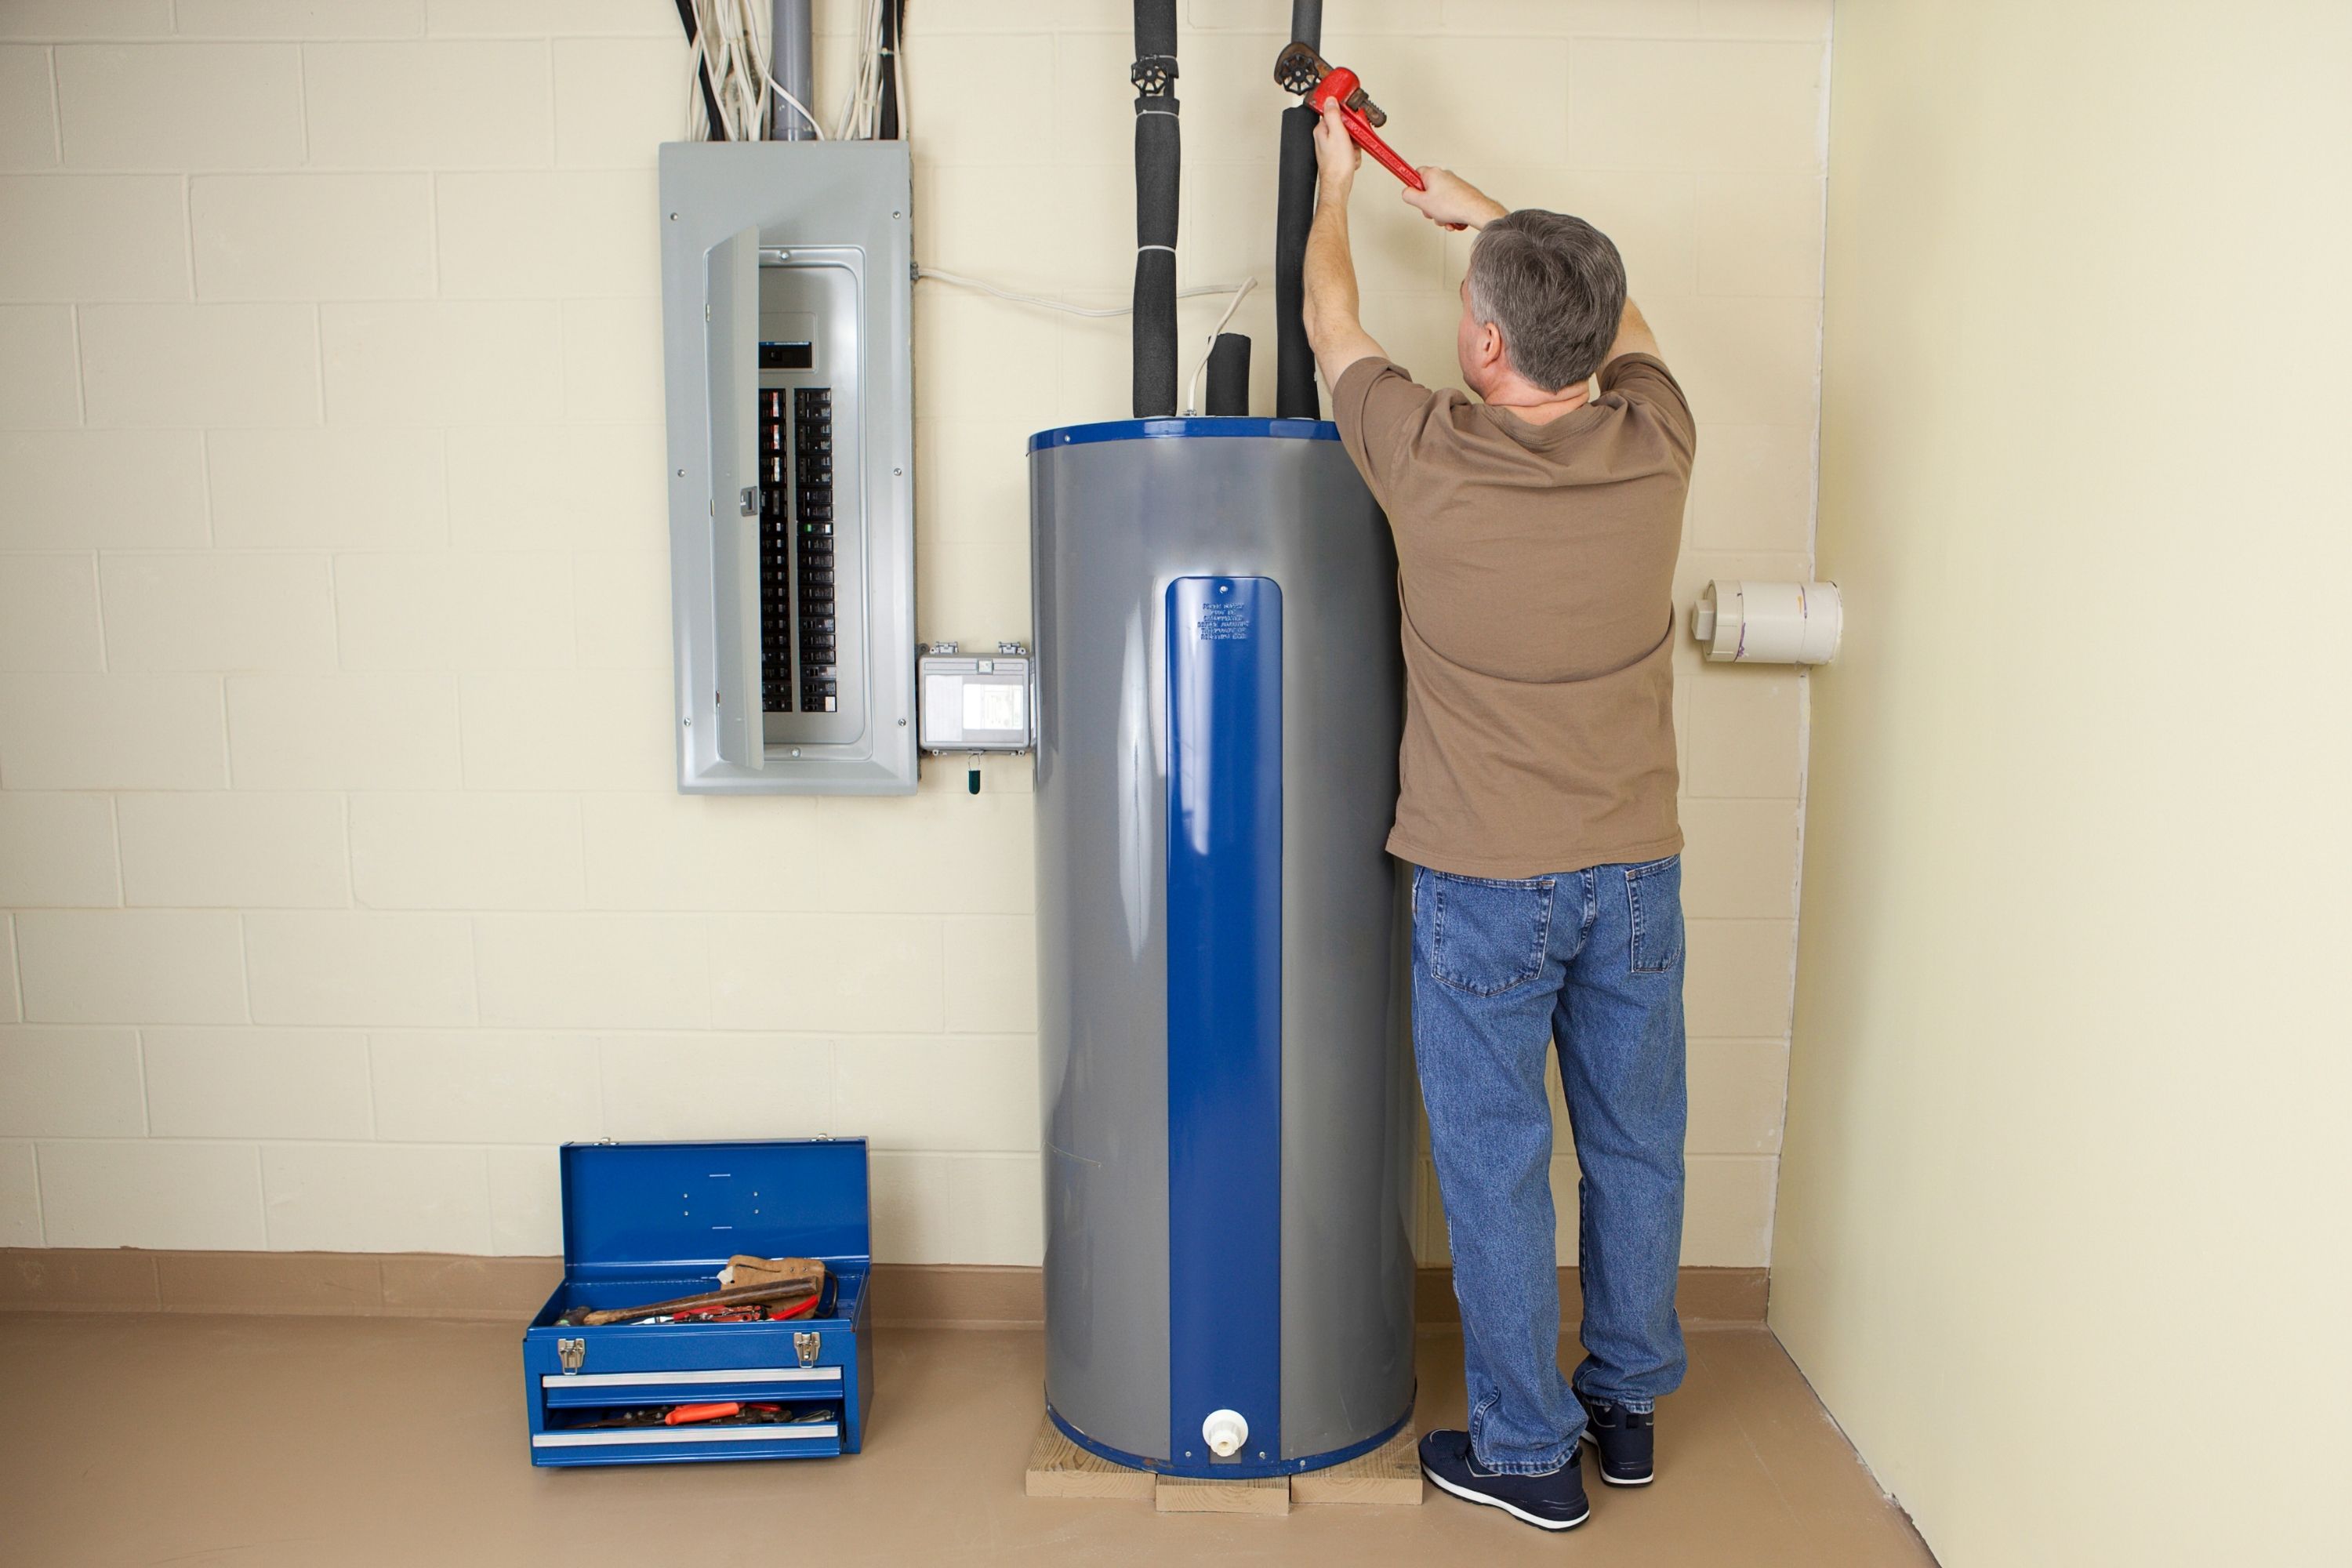 Water Heater Cover Ideas